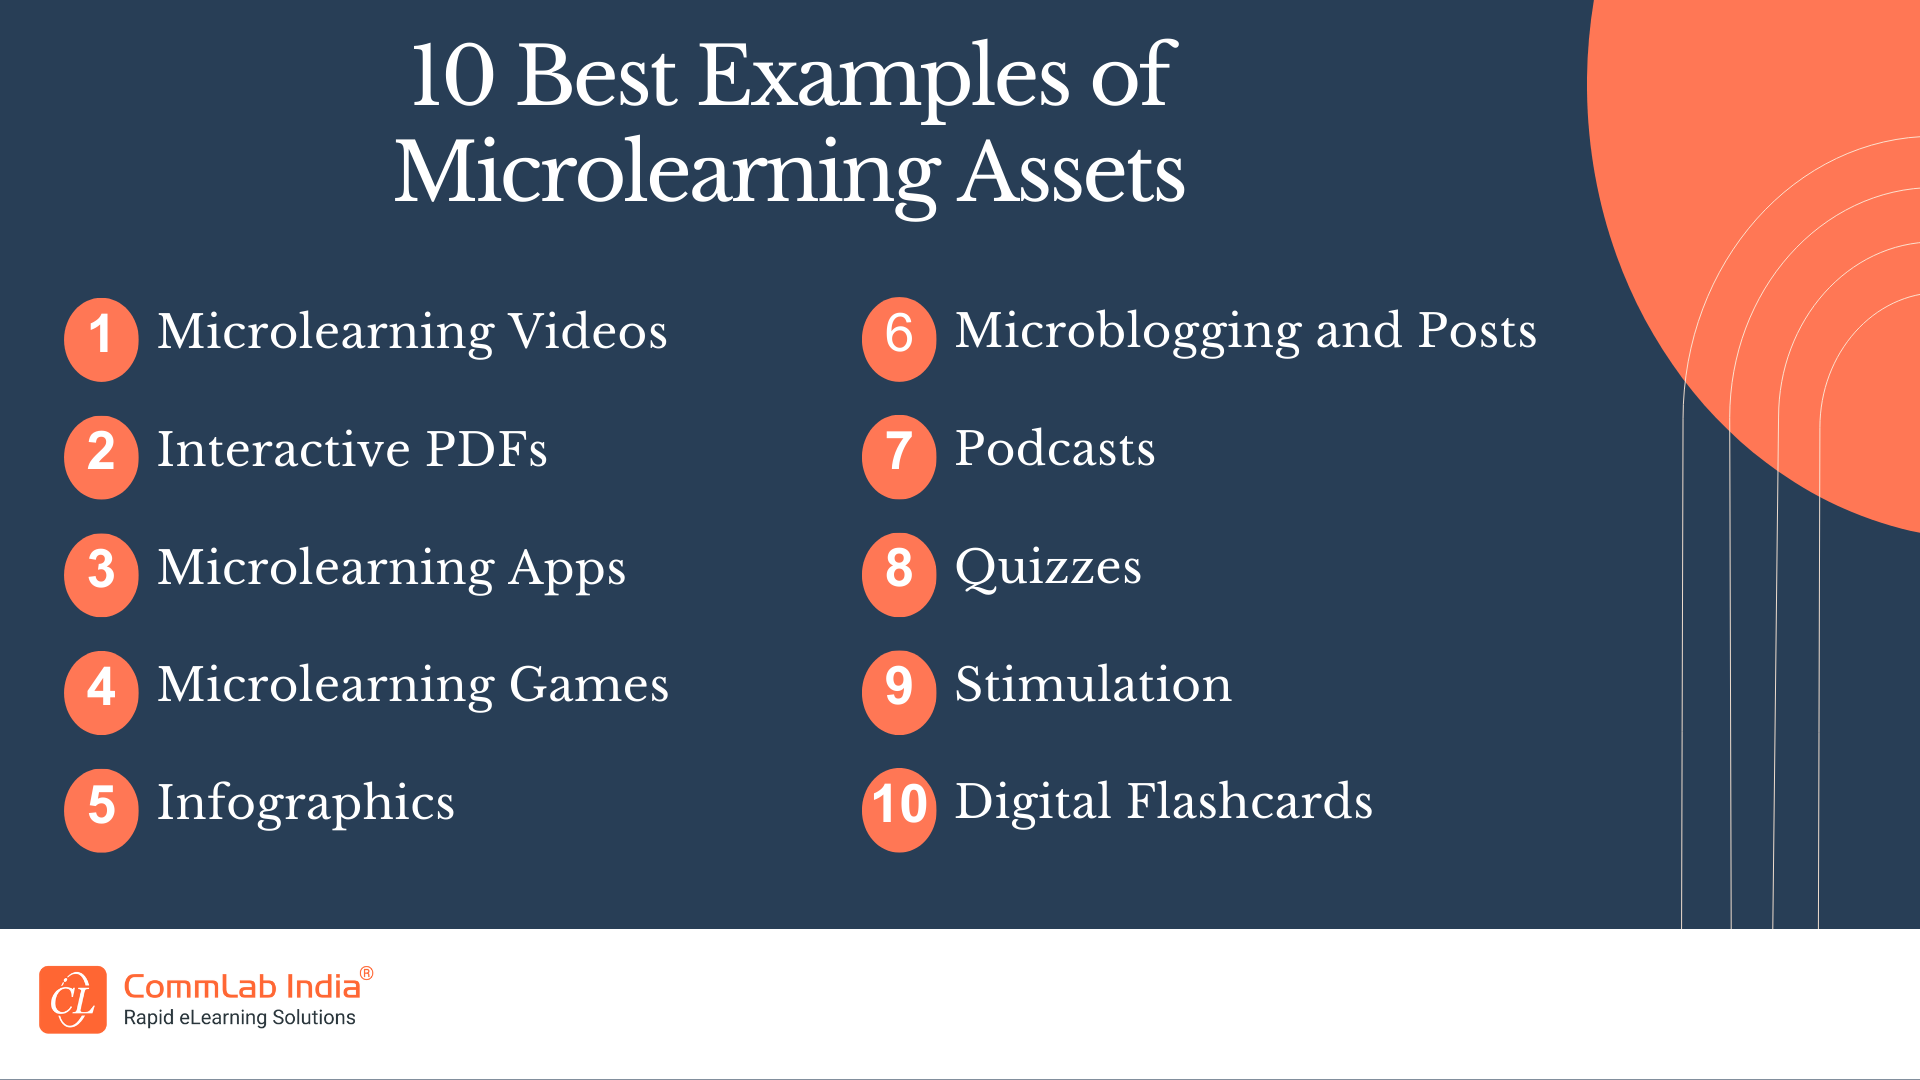 10 Best Examples of Microlearning Assets